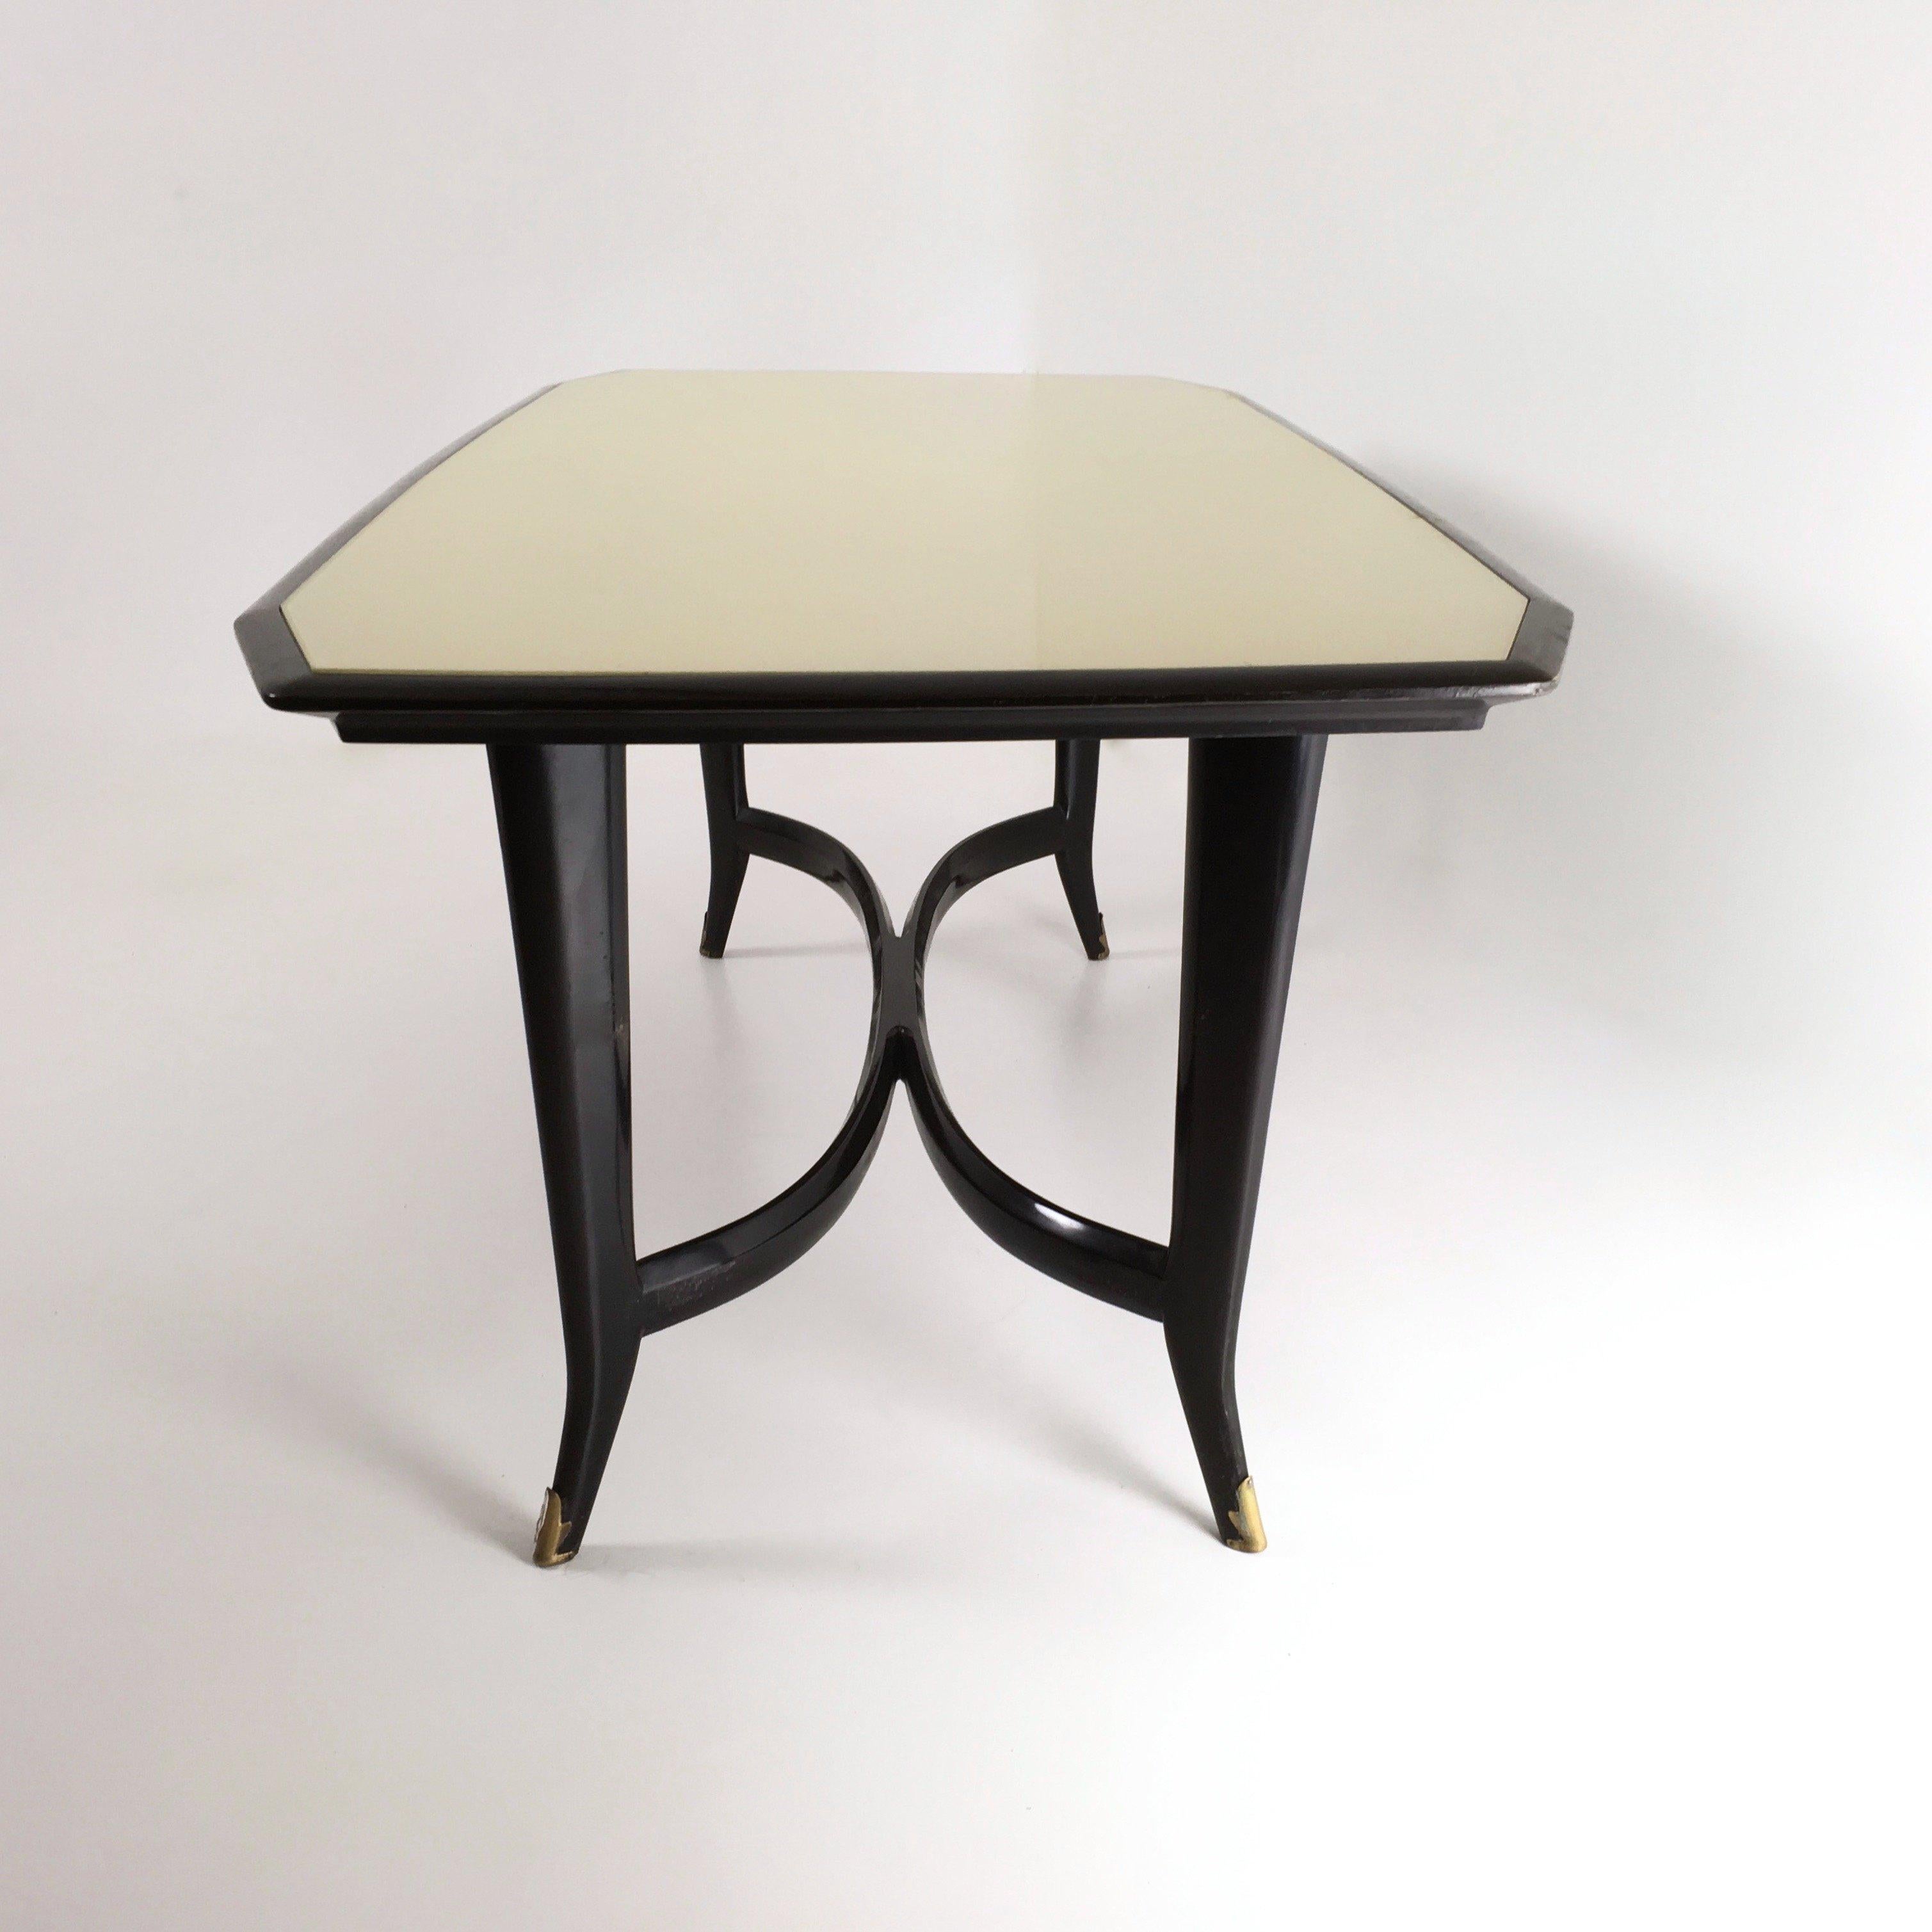 Mid-Century Modern Ebonized Beech Dining Table ascribable to Ulrich with a Glass Top, Italy